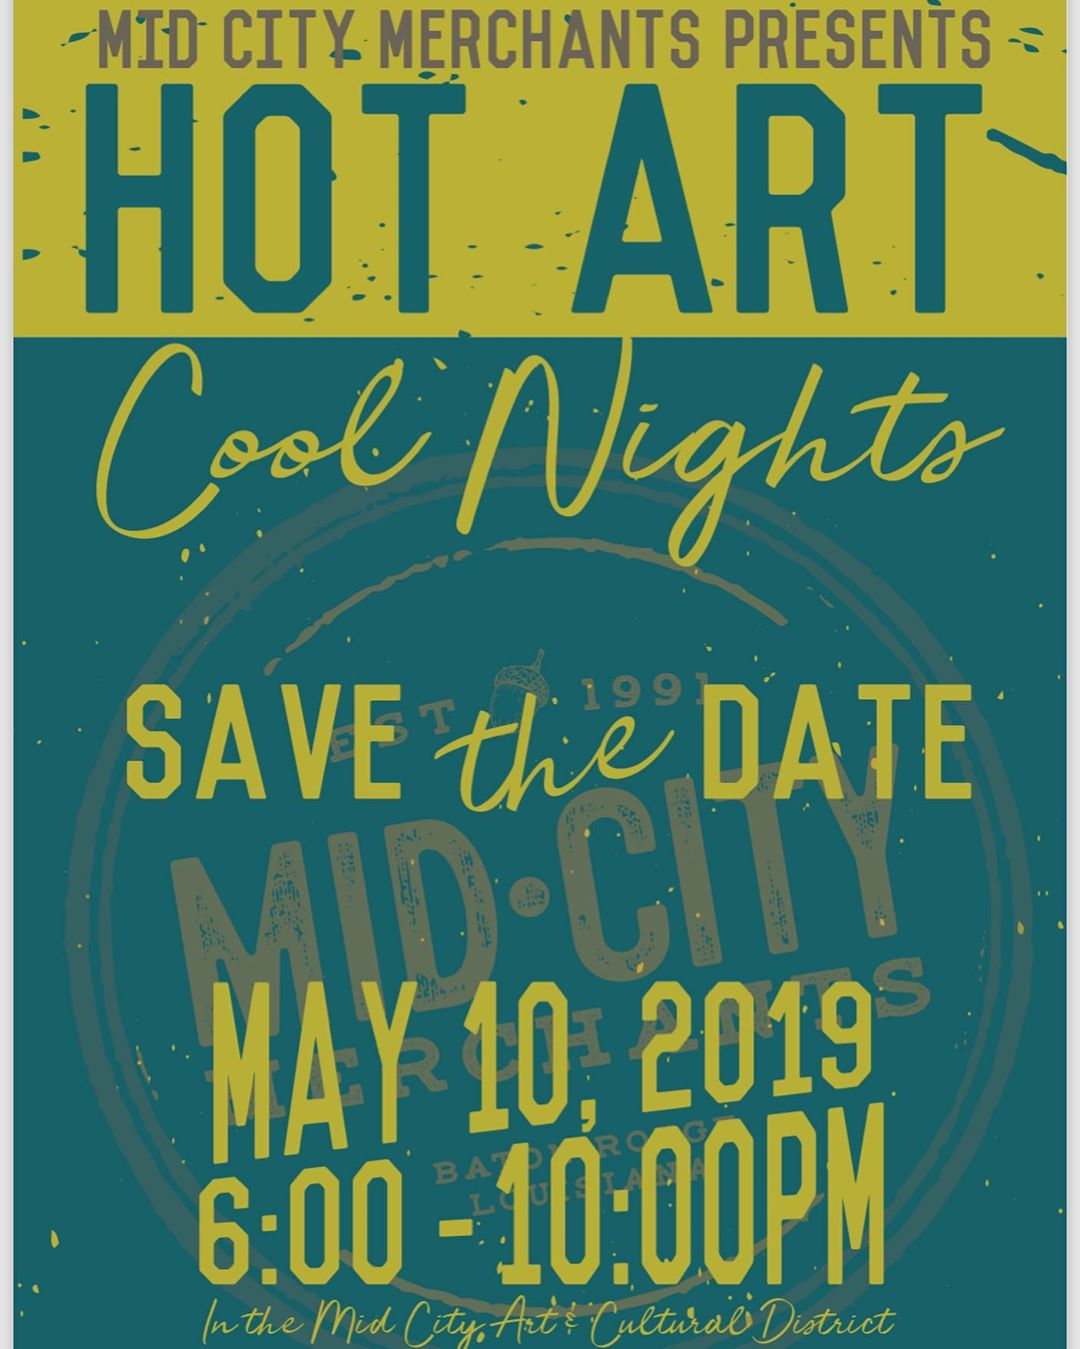 Get your rain boots on and come on out tonight for some fun, food, art…